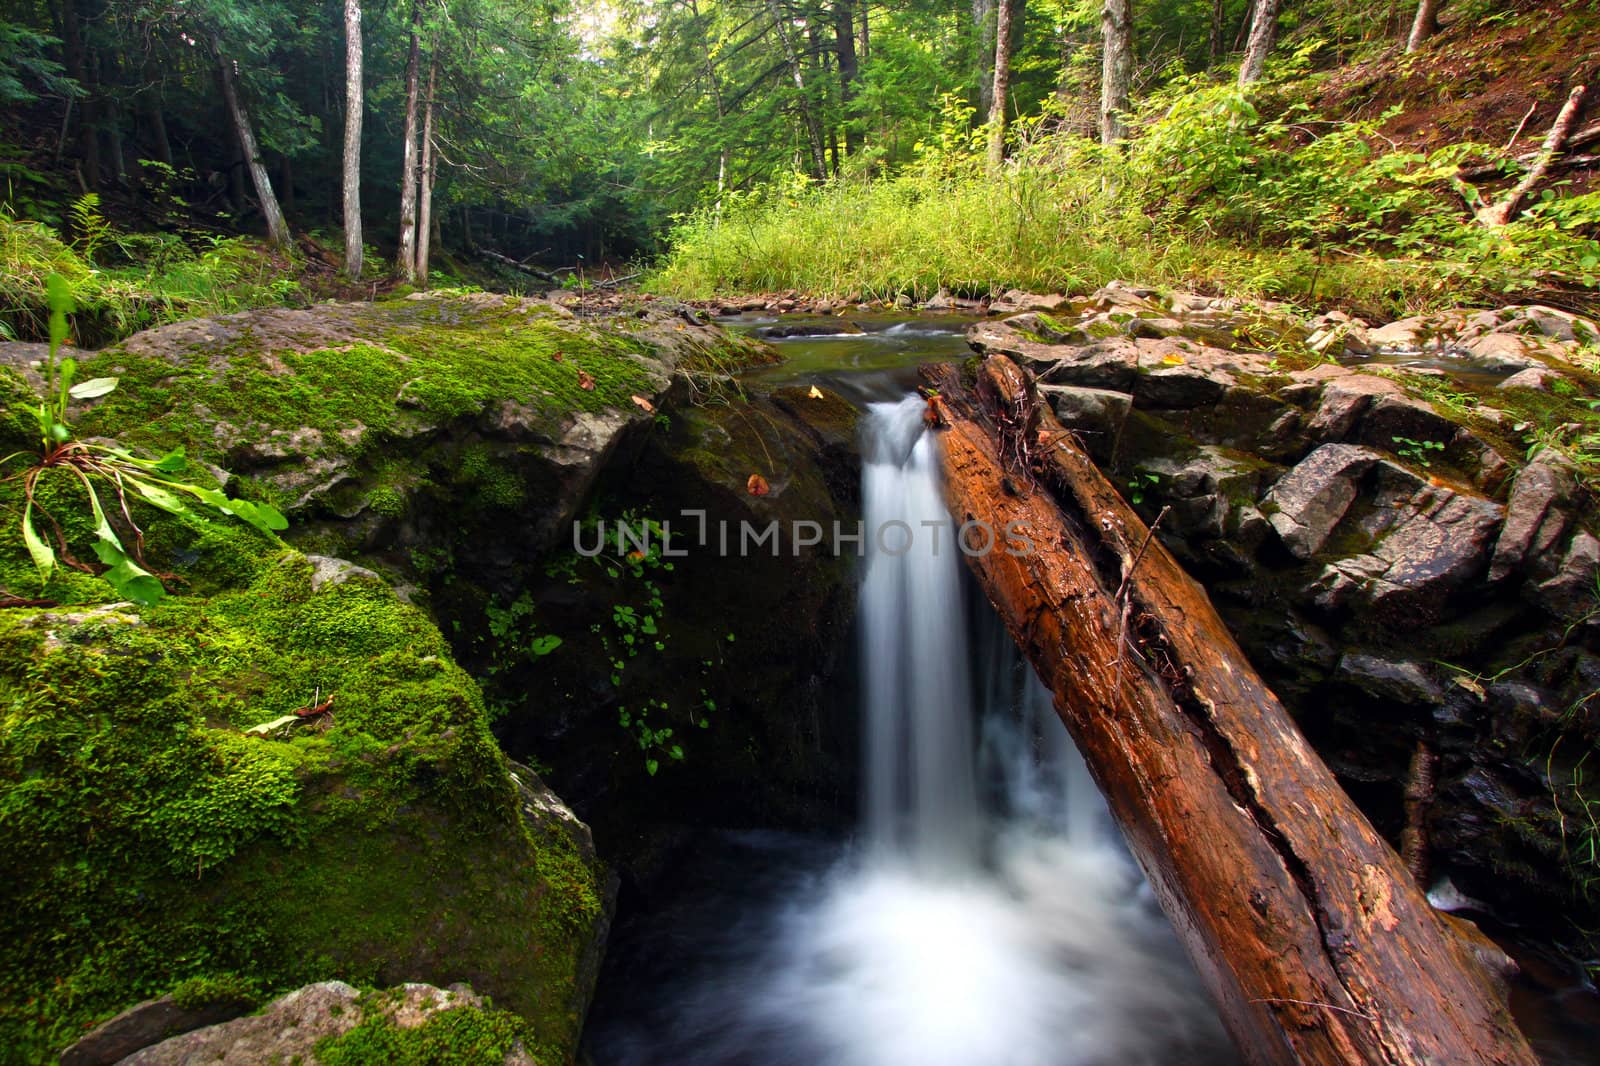 Union River Gorge Waterfall Michigan by Wirepec